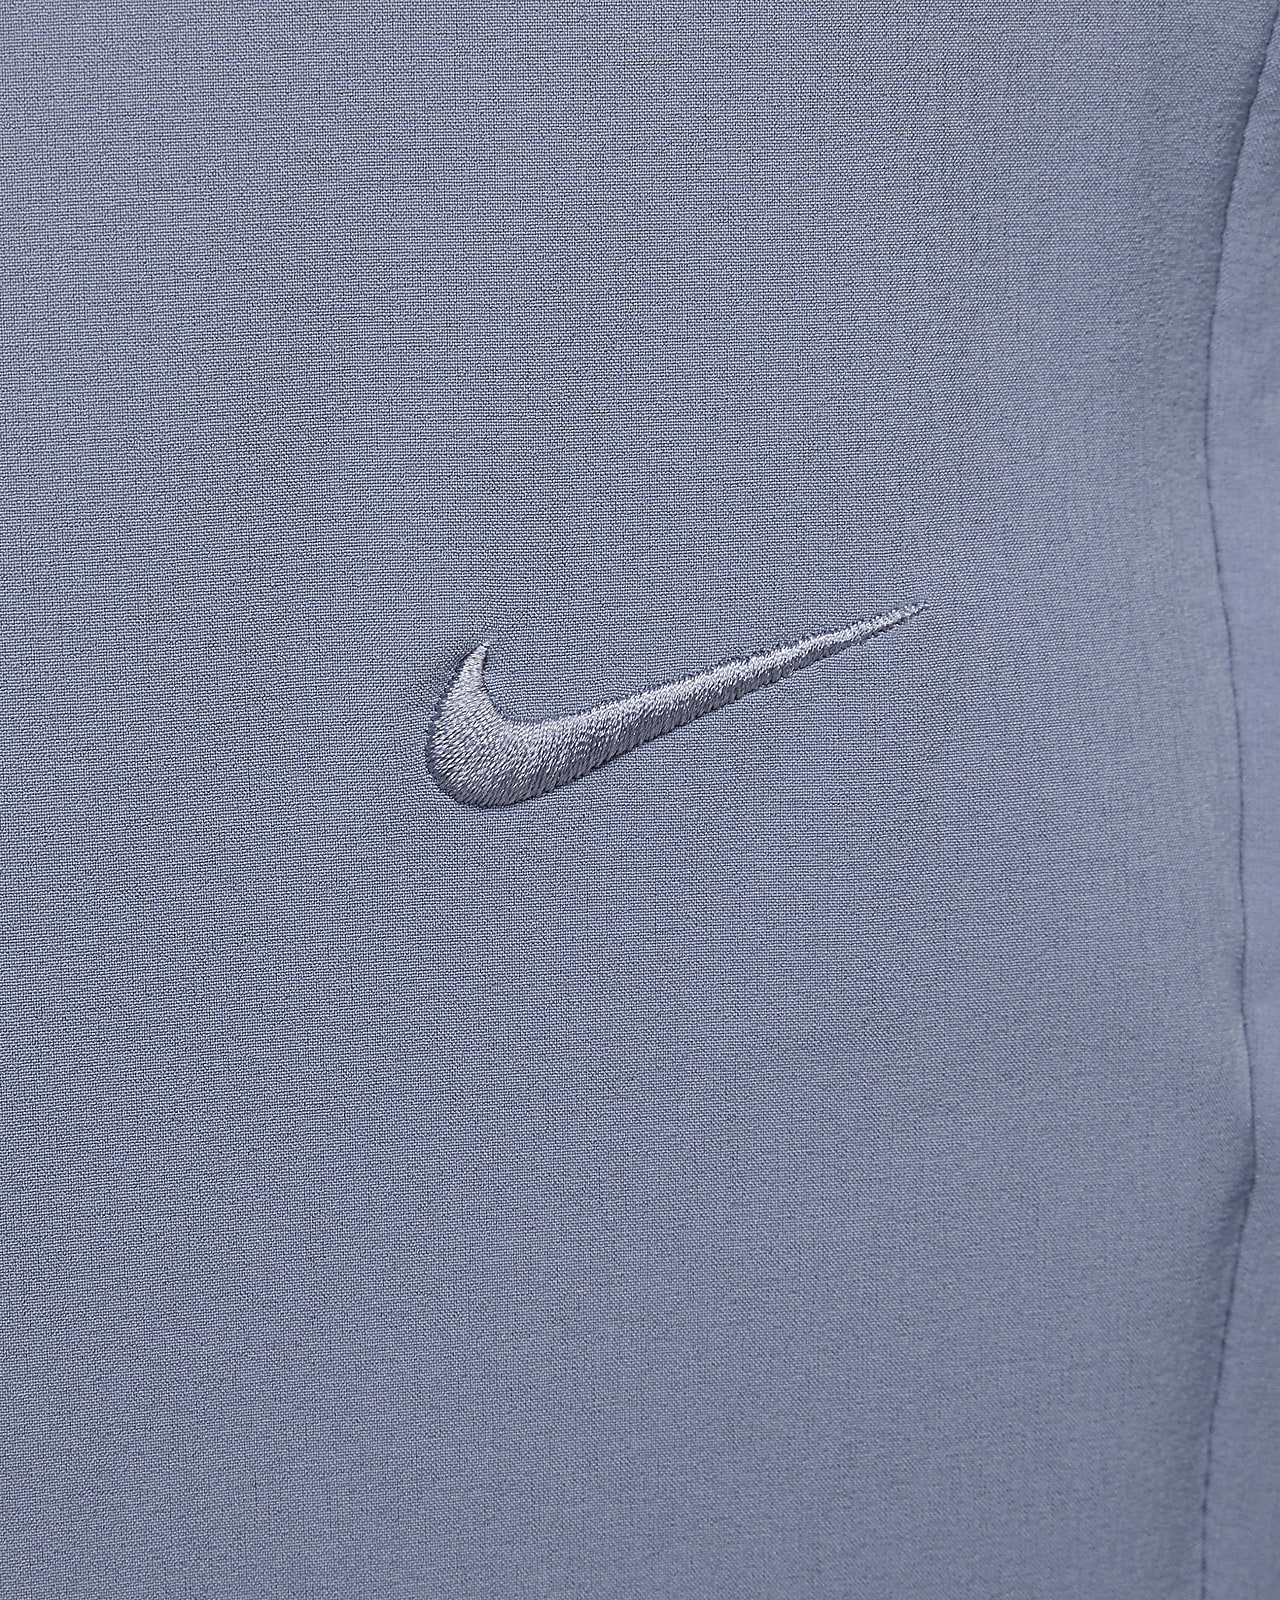 Nike Unlimited Woven Track Pants